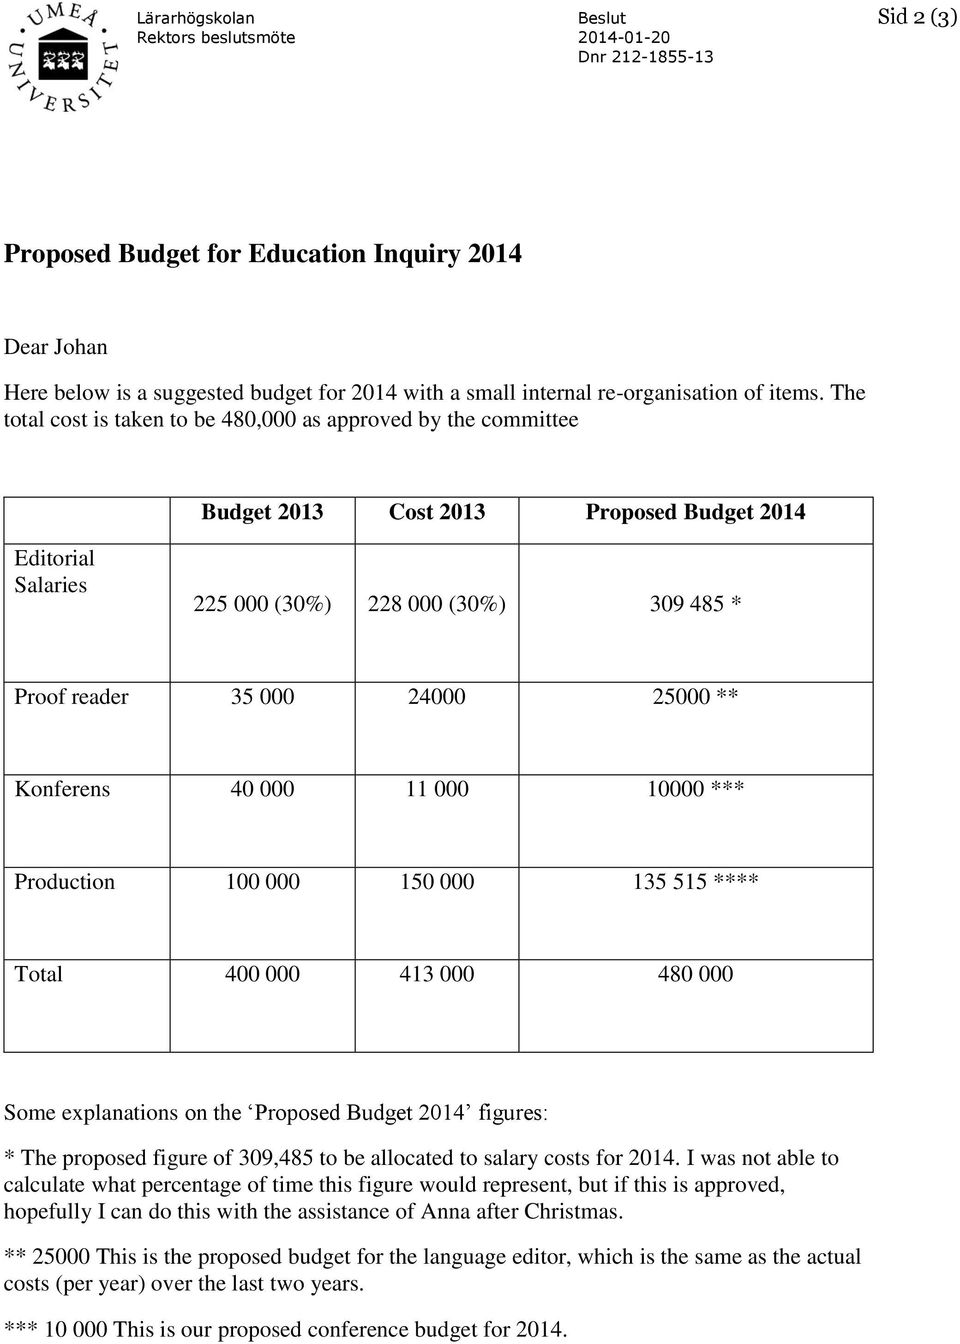 ** Konferens 40 000 11 000 10000 *** Production 100 000 150 000 135 515 **** Total 400 000 413 000 480 000 Some explanations on the Proposed Budget 2014 figures: * The proposed figure of 309,485 to